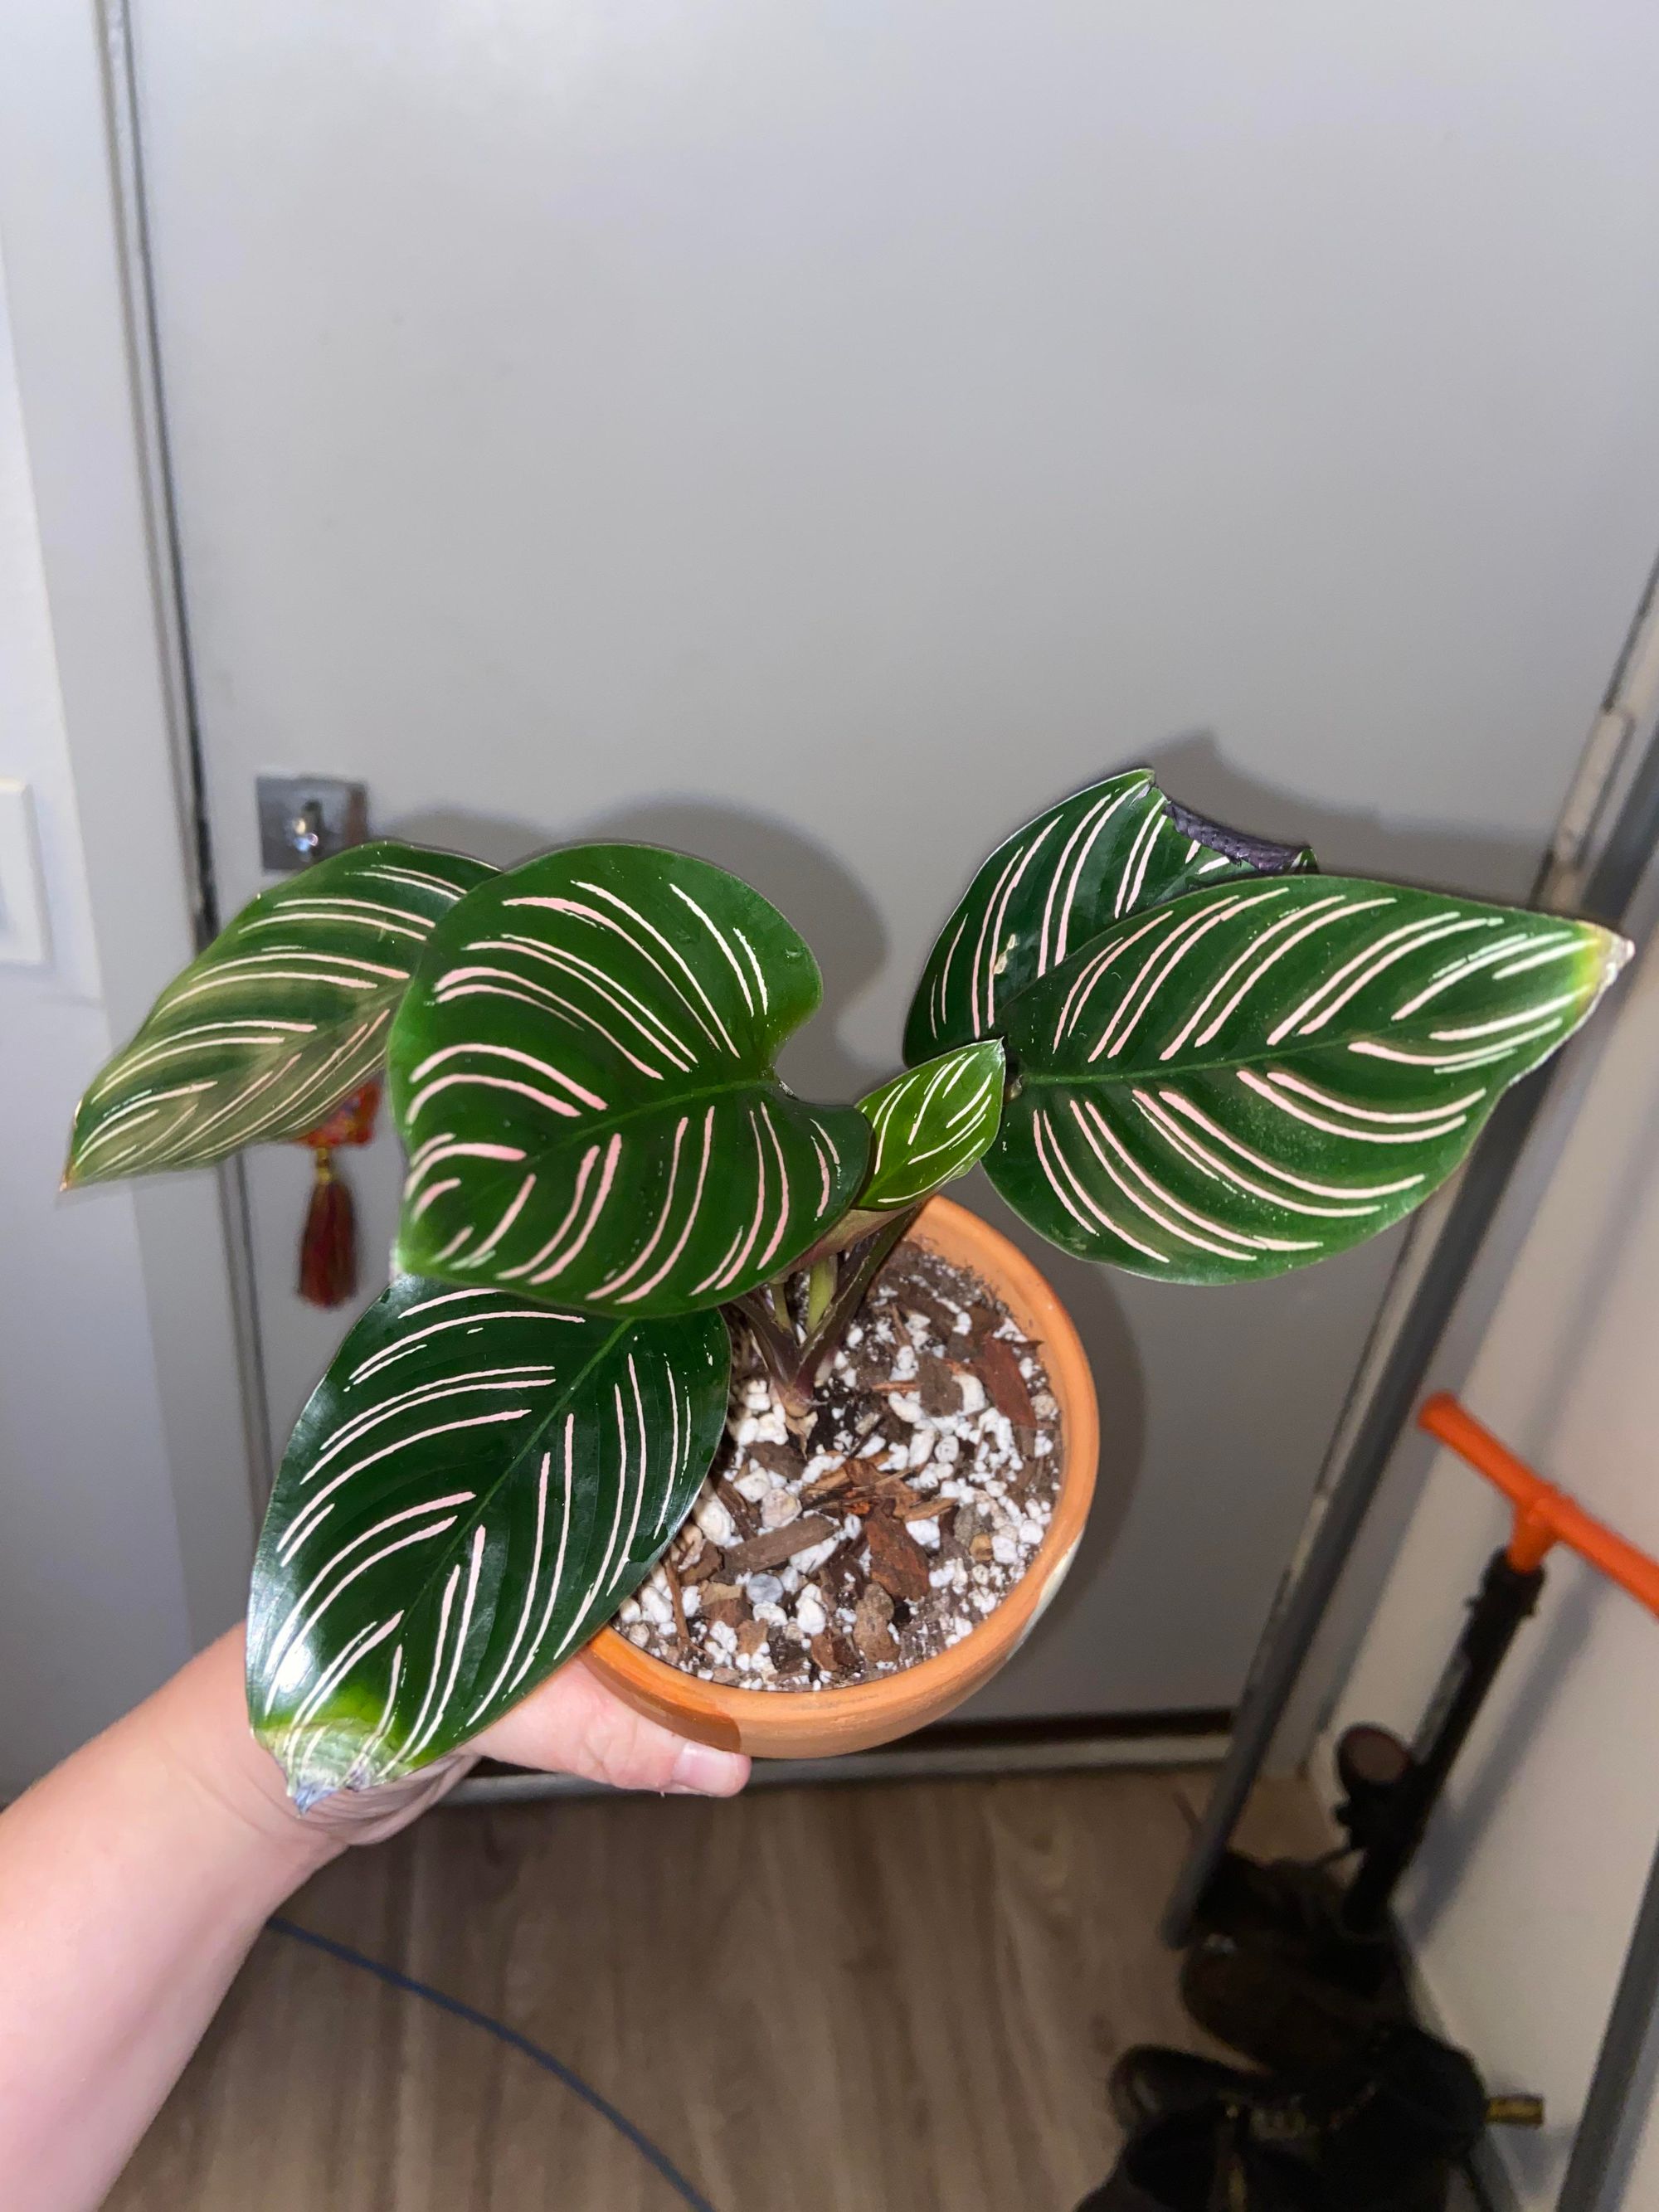 8 Lessons I learnt after buying a Calathea Ornata plant